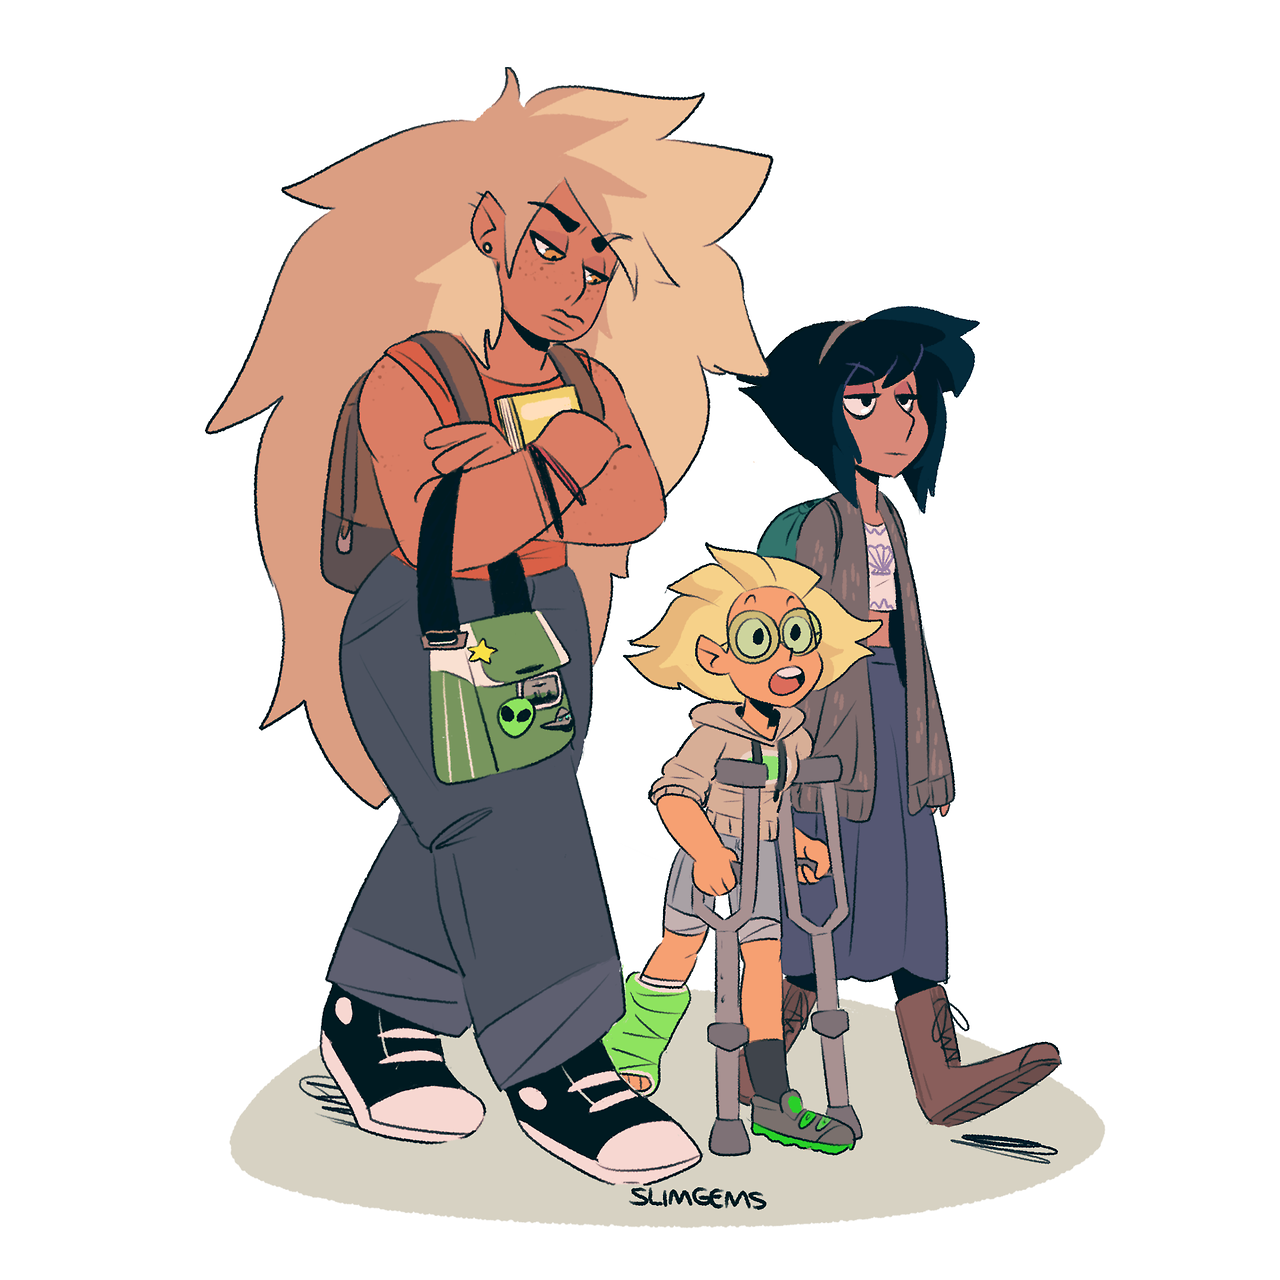 theyre probably in a group project